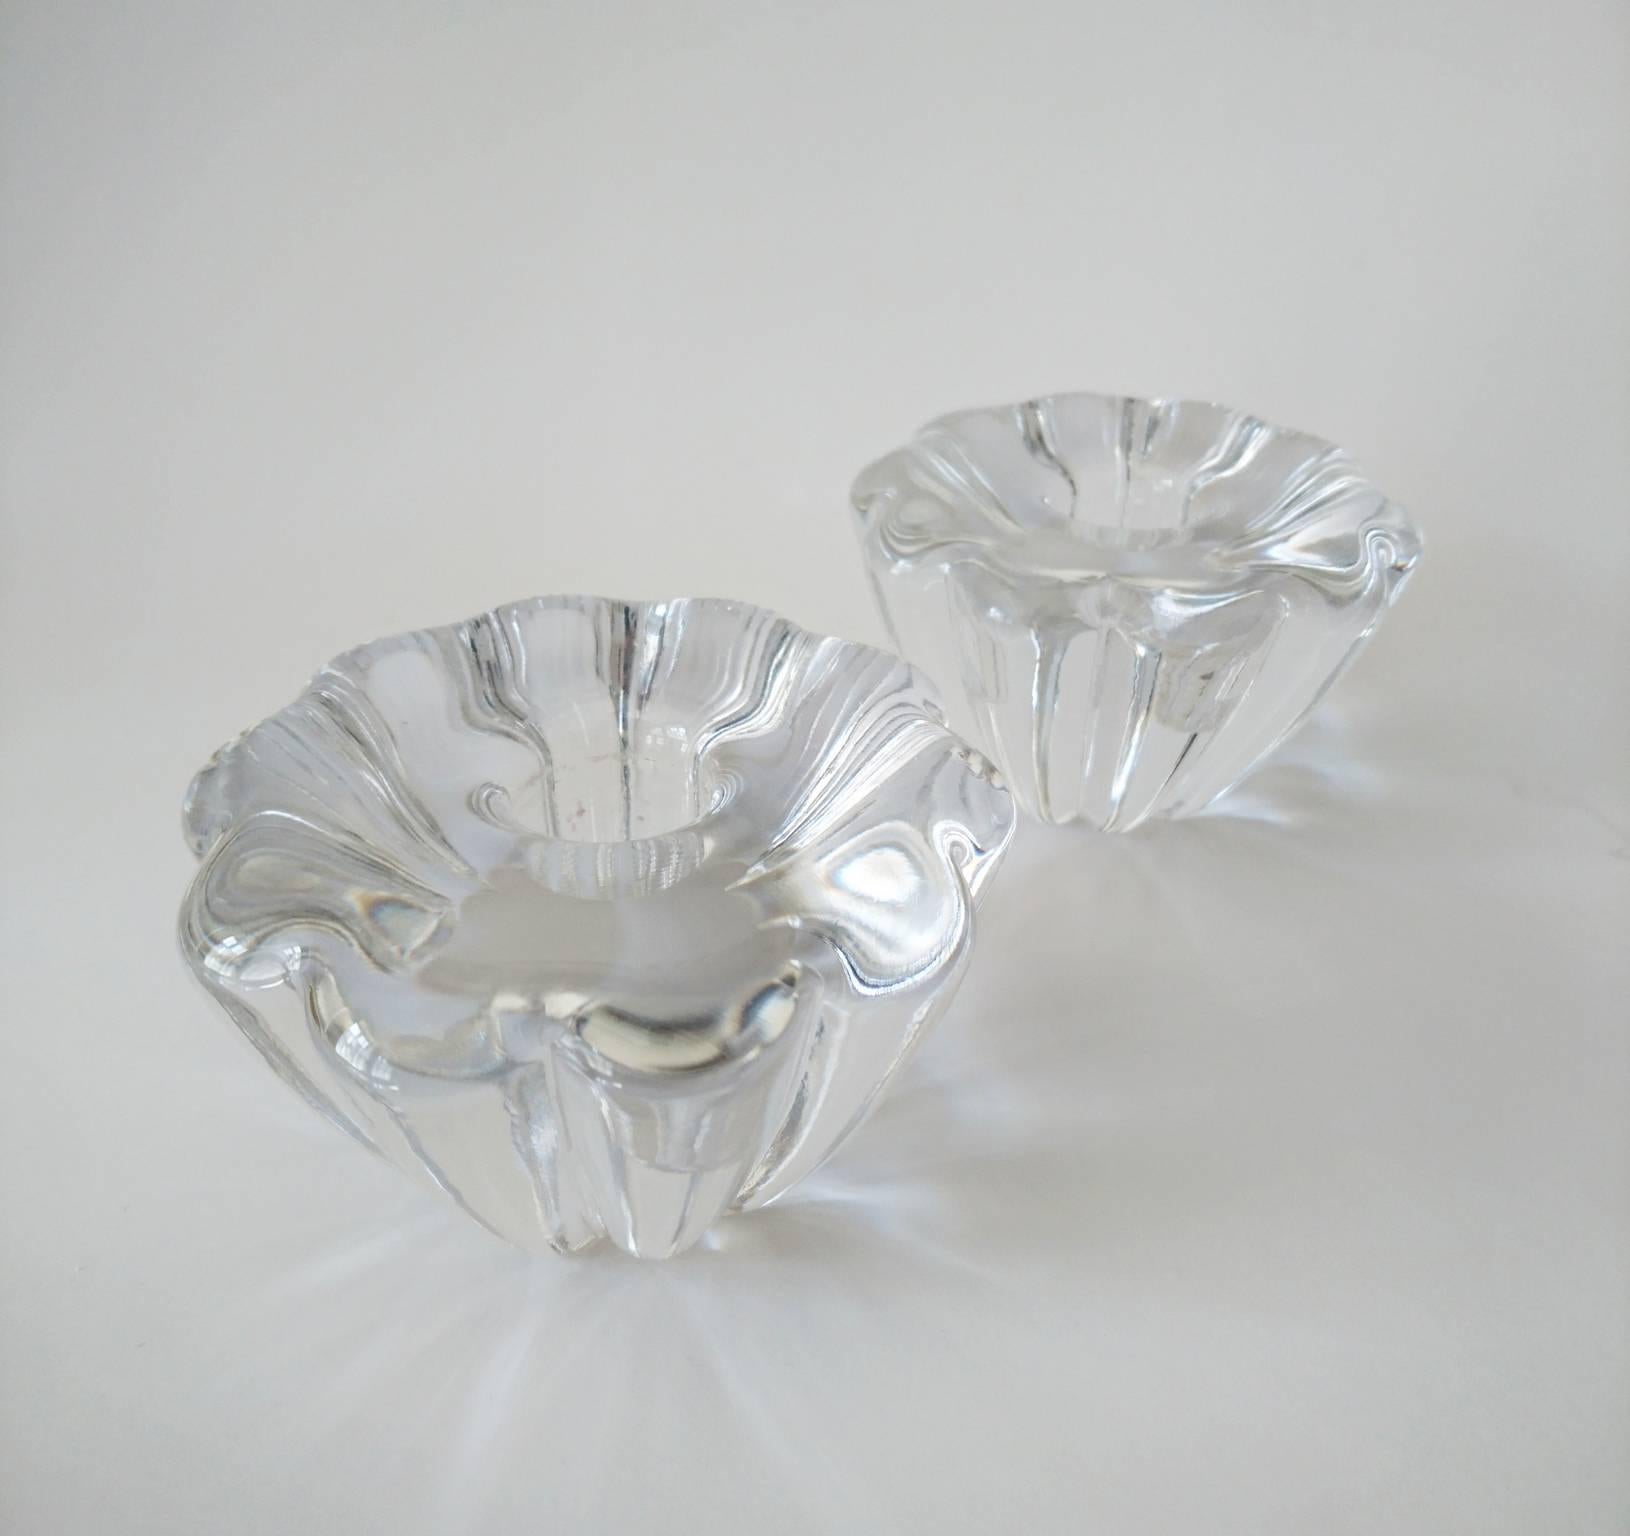 Mid-Century Modern Midcentury Pair of Candleholders in Crystal by Orrefors Sweden